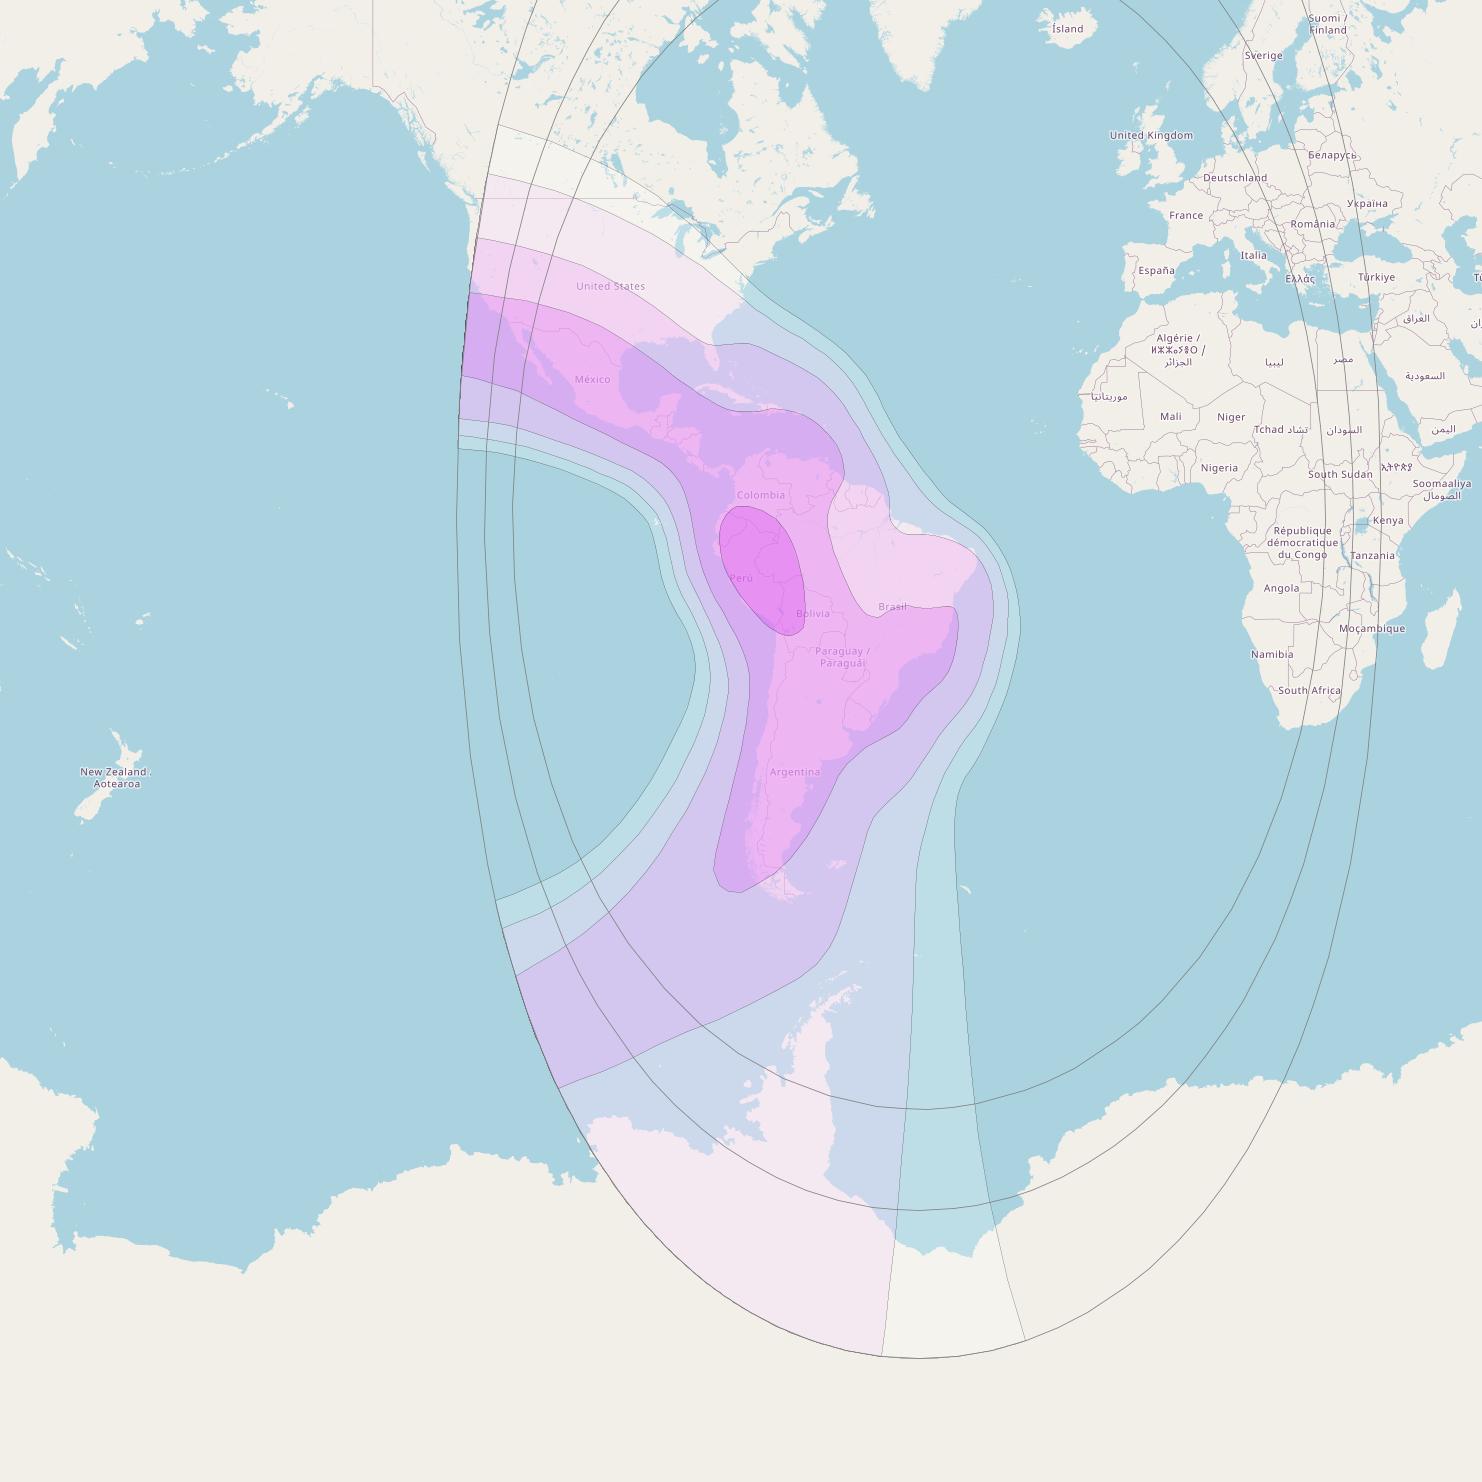 Intelsat 14 at 45° W downlink C-band Americas Beam coverage map